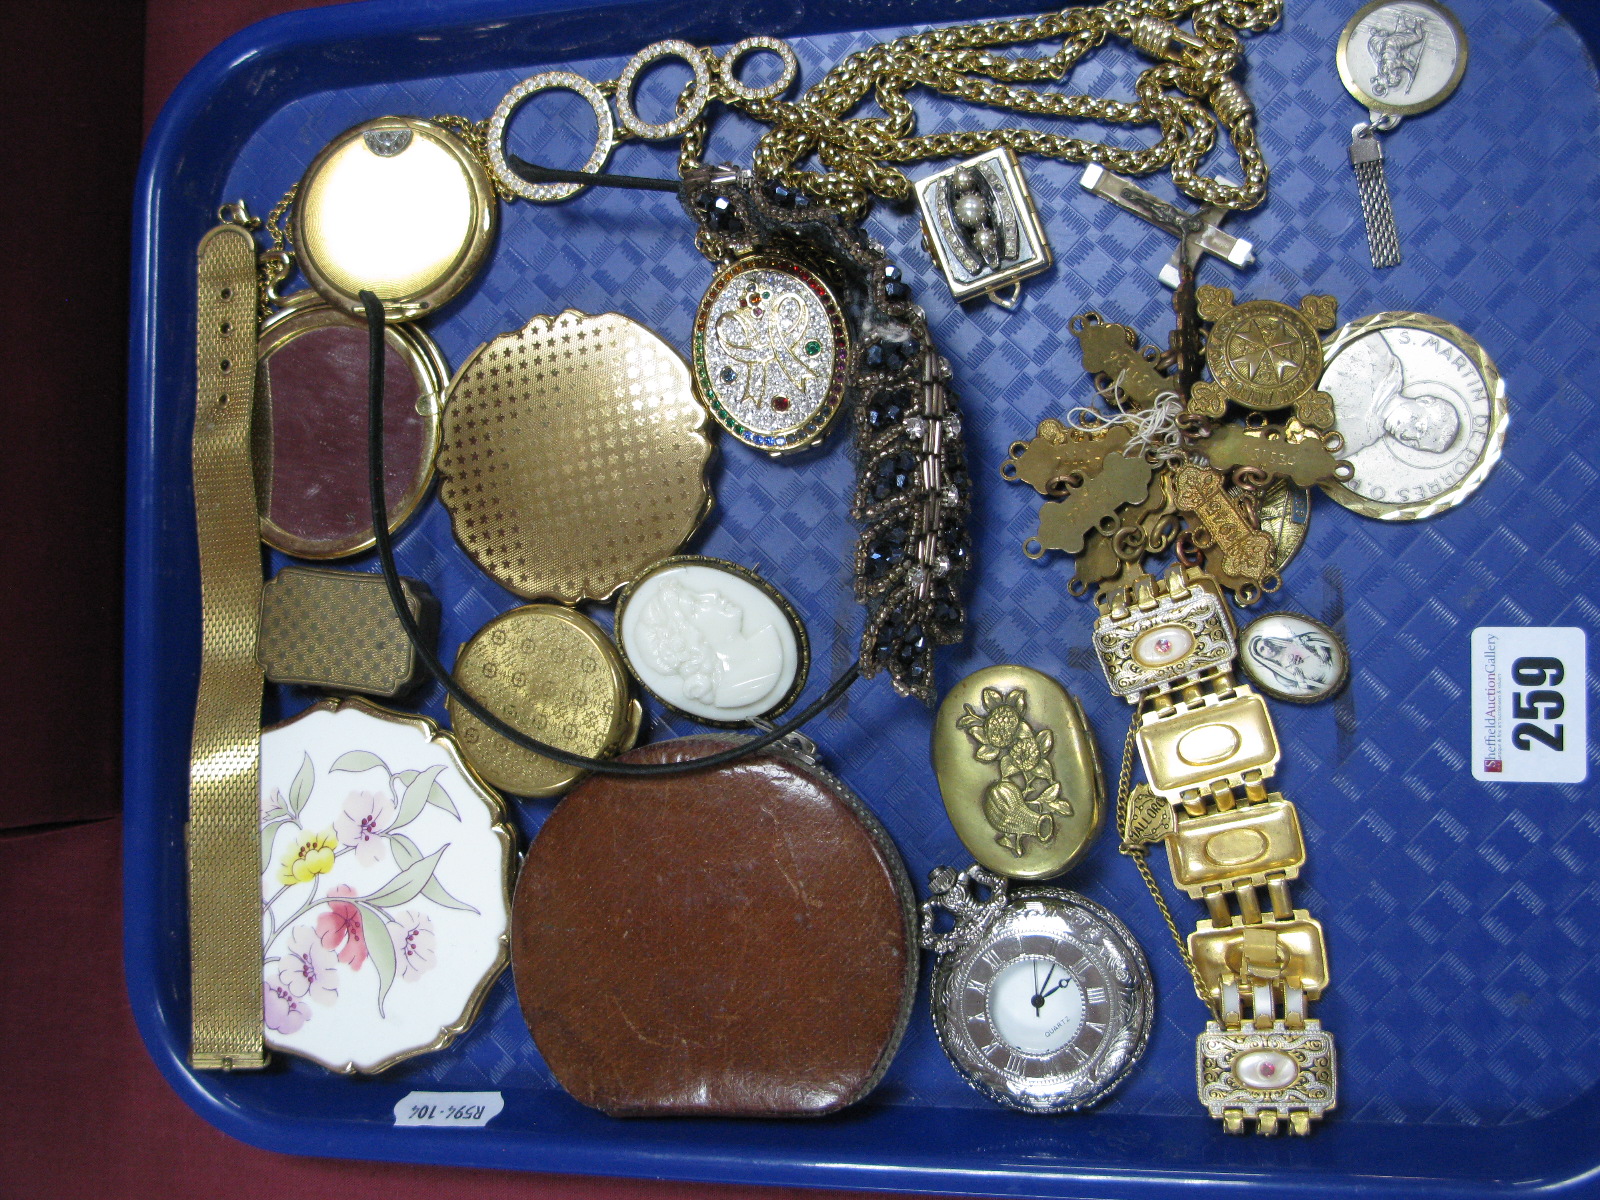 Ladies Compact and Pill Boxes, a rectangular ornate panel style bracelet, a quartz pocketwatch, a